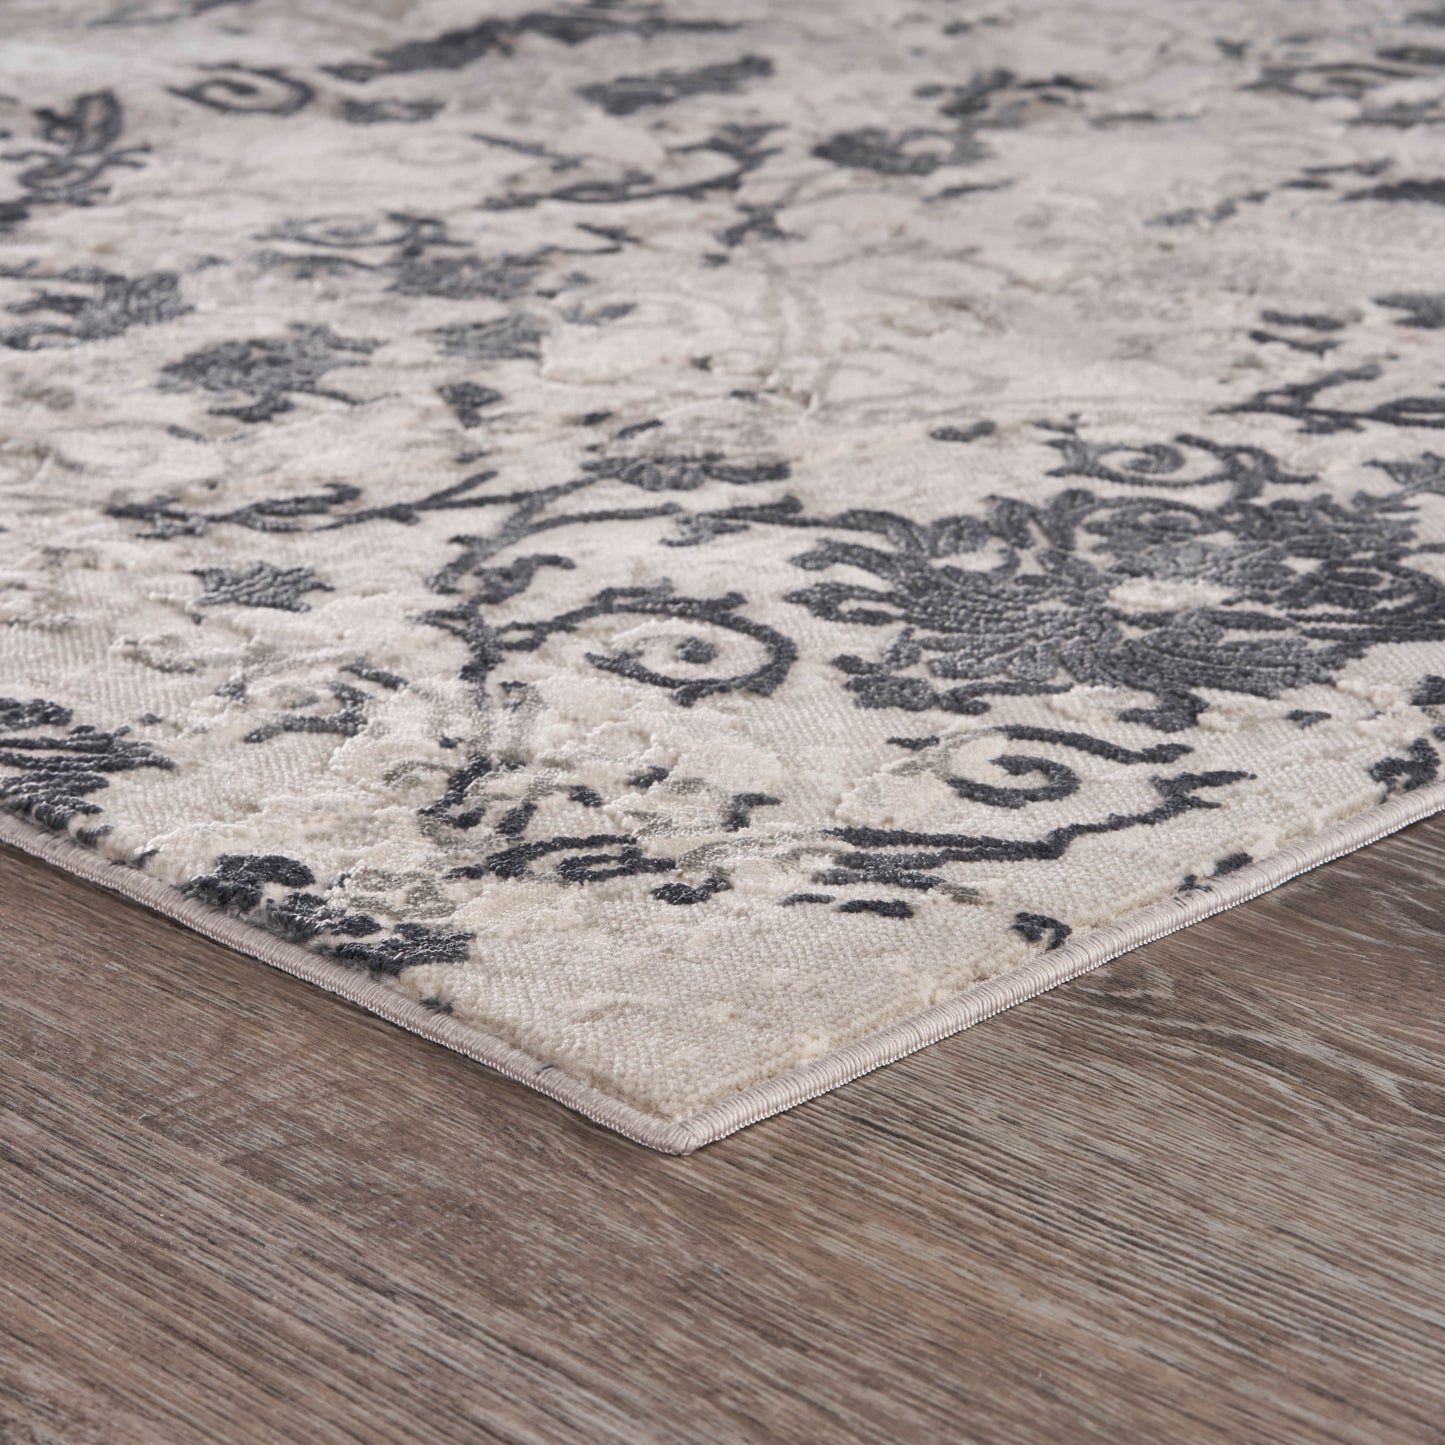 10' X 13' Cream And Gray Damask Stain Resistant Area Rug